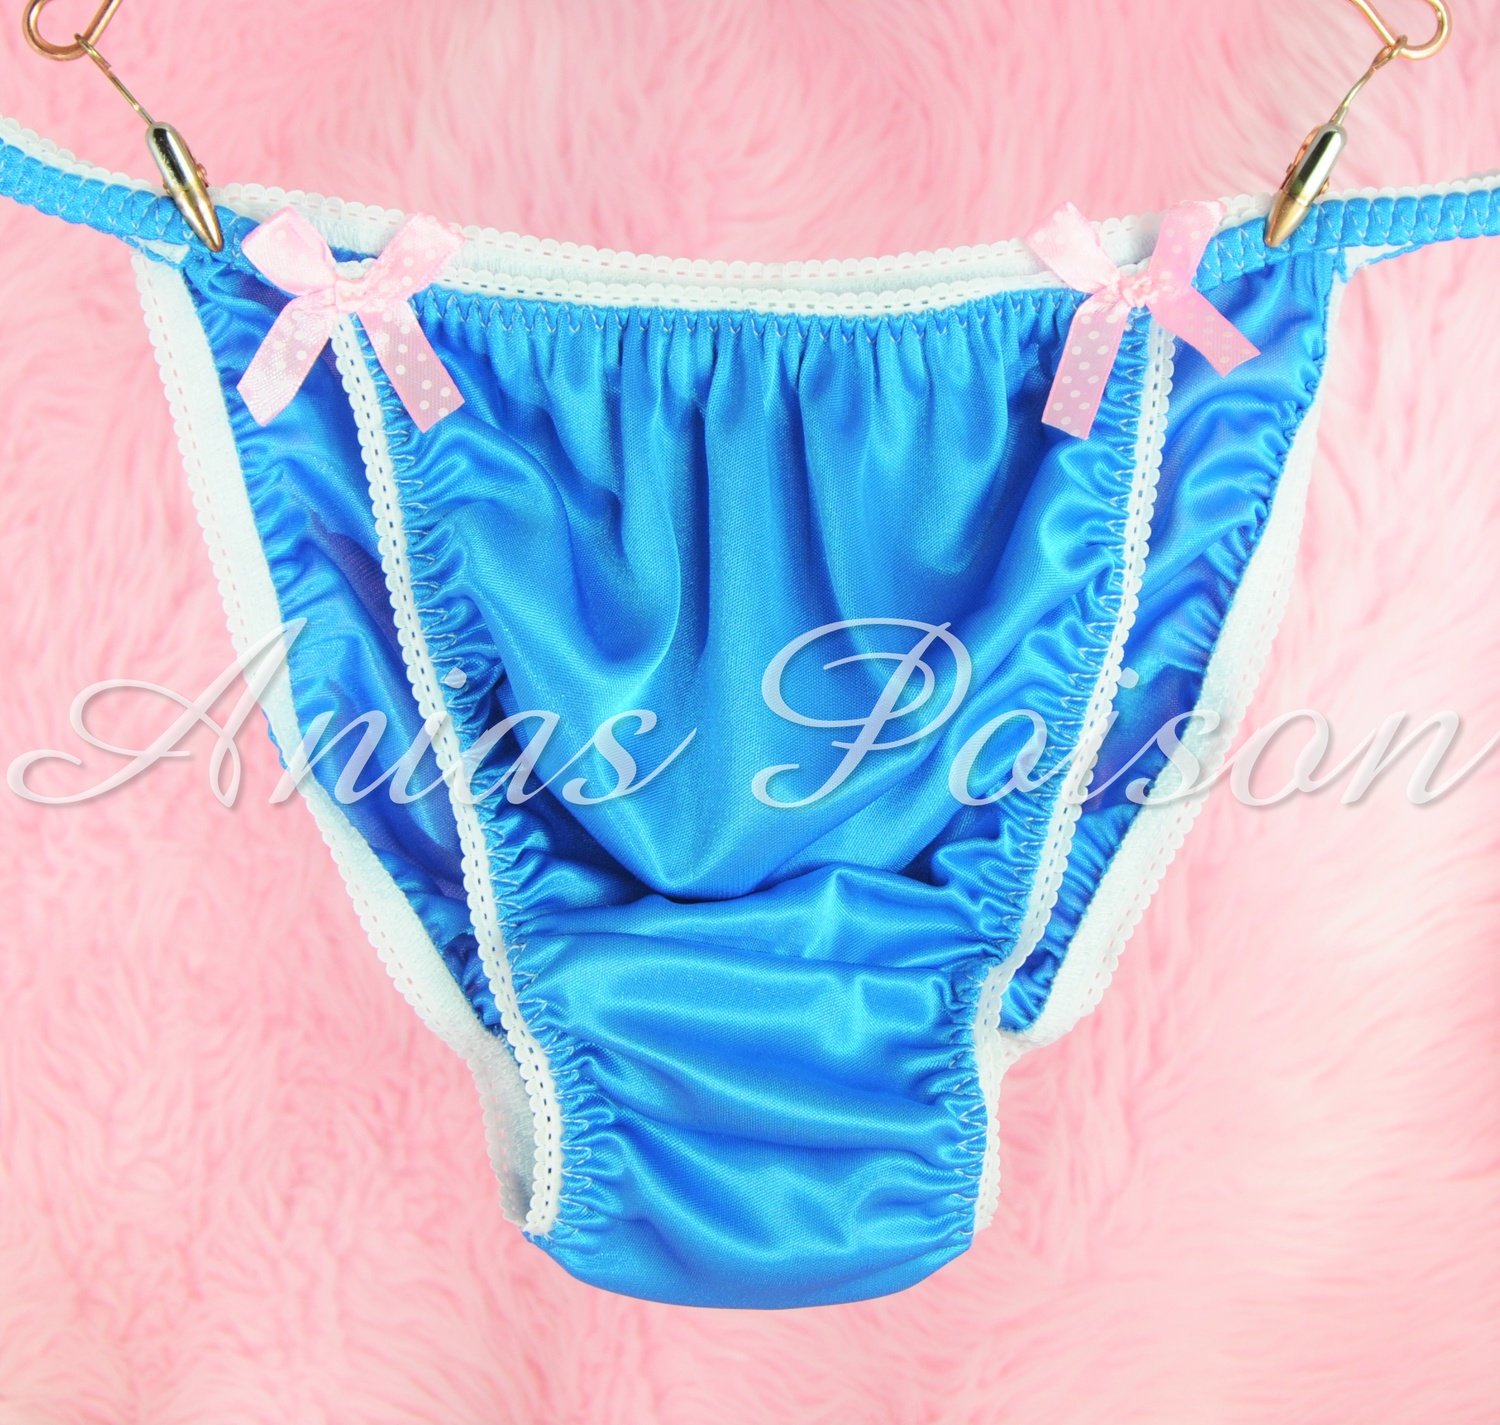 Ania's Poison MANties S - XL shiny Rare Butter Soft Collection polyester string bikini sissy mens underwear panties